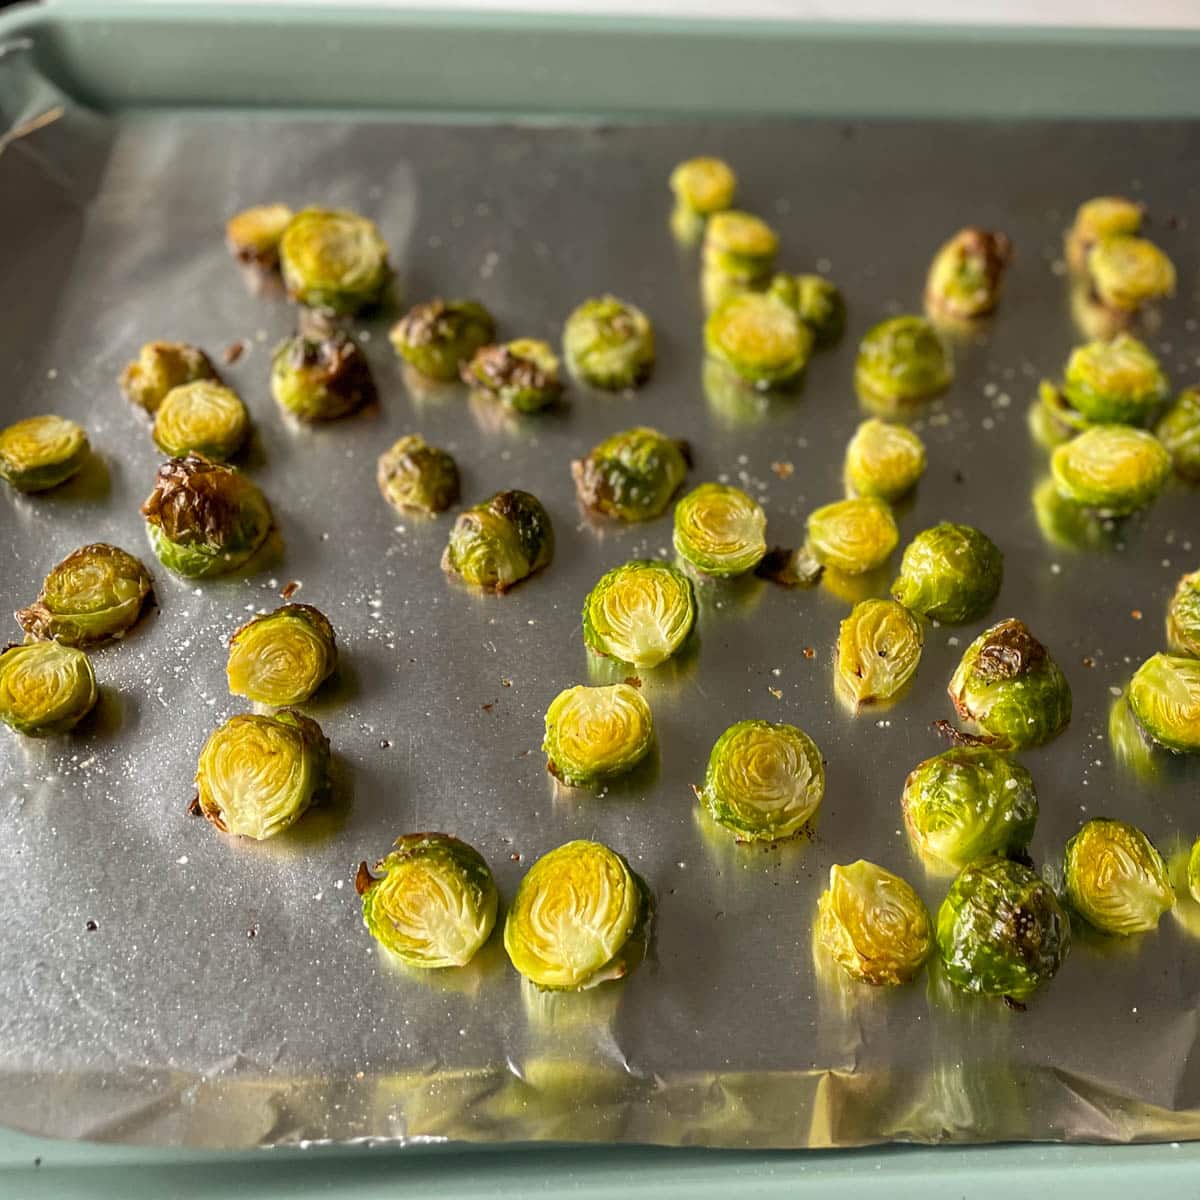 Roasted brussels sprouts are shown on a sheet tray.